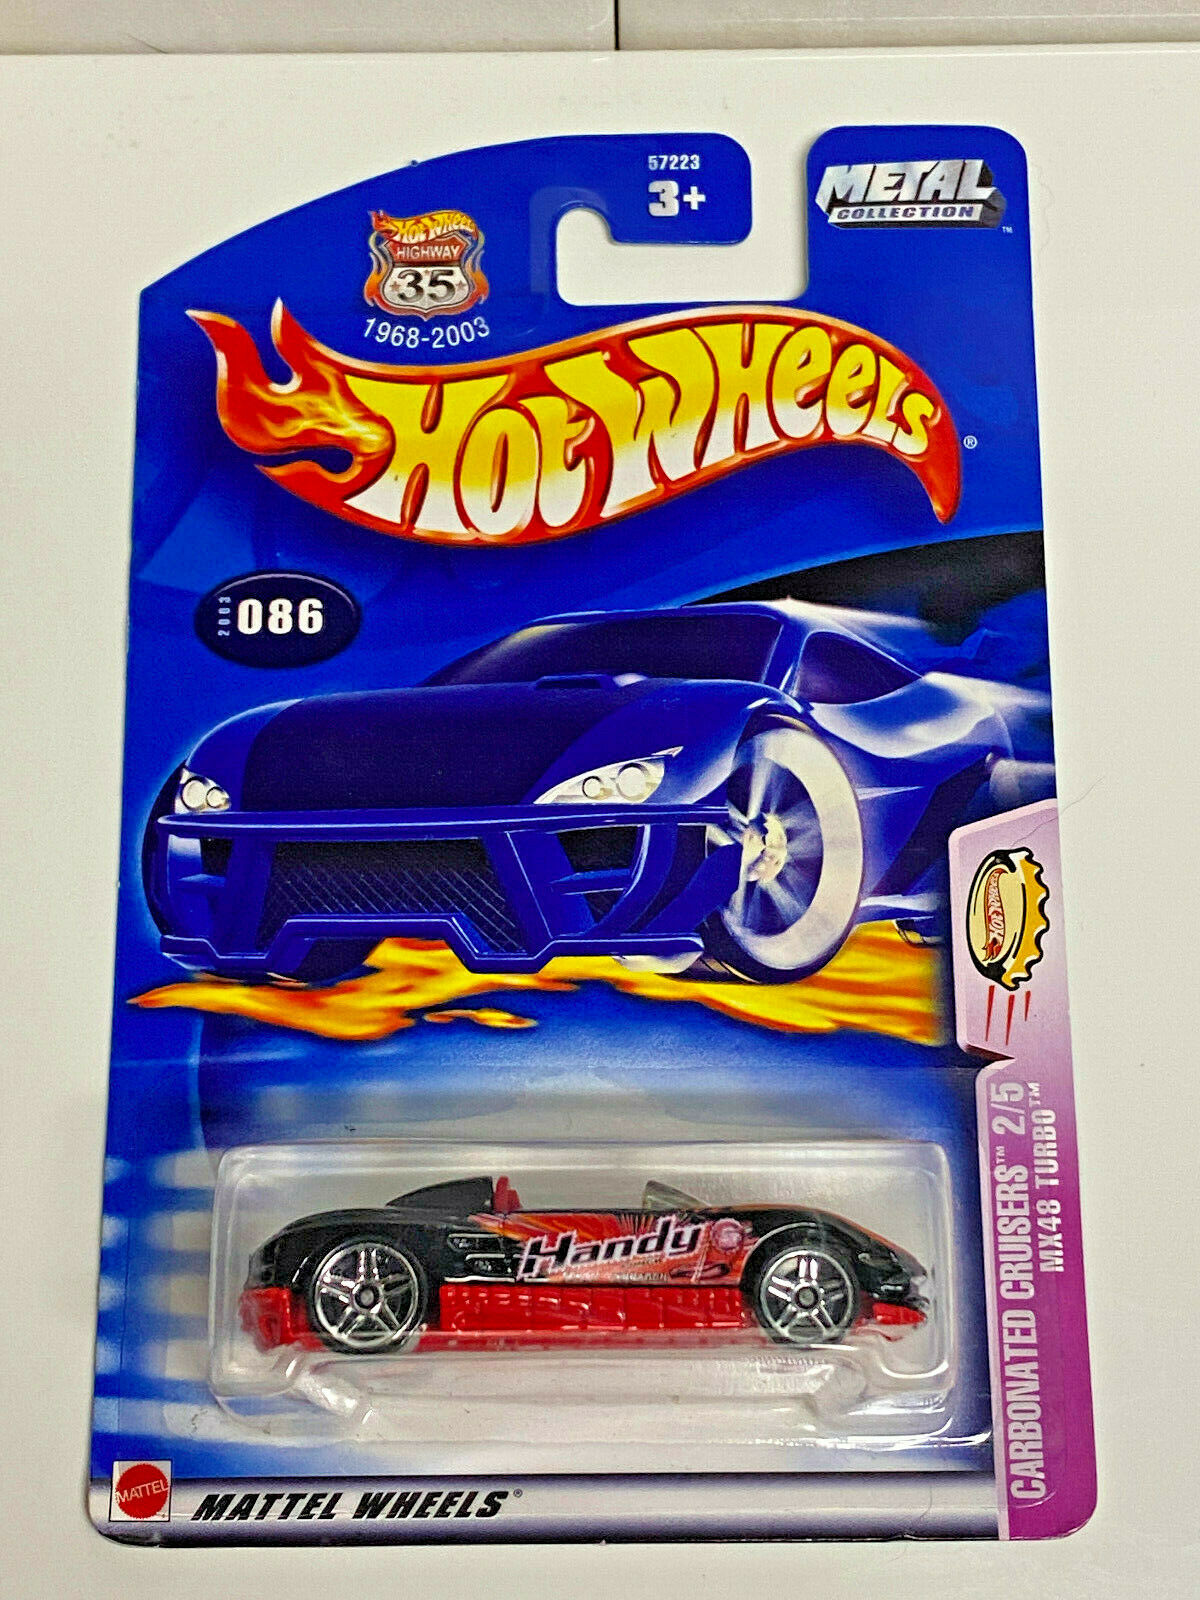 2003 Hot Wheels Carbonated Cruisers FULL SET Lot of 5 #85, #86, #87, #88, #89